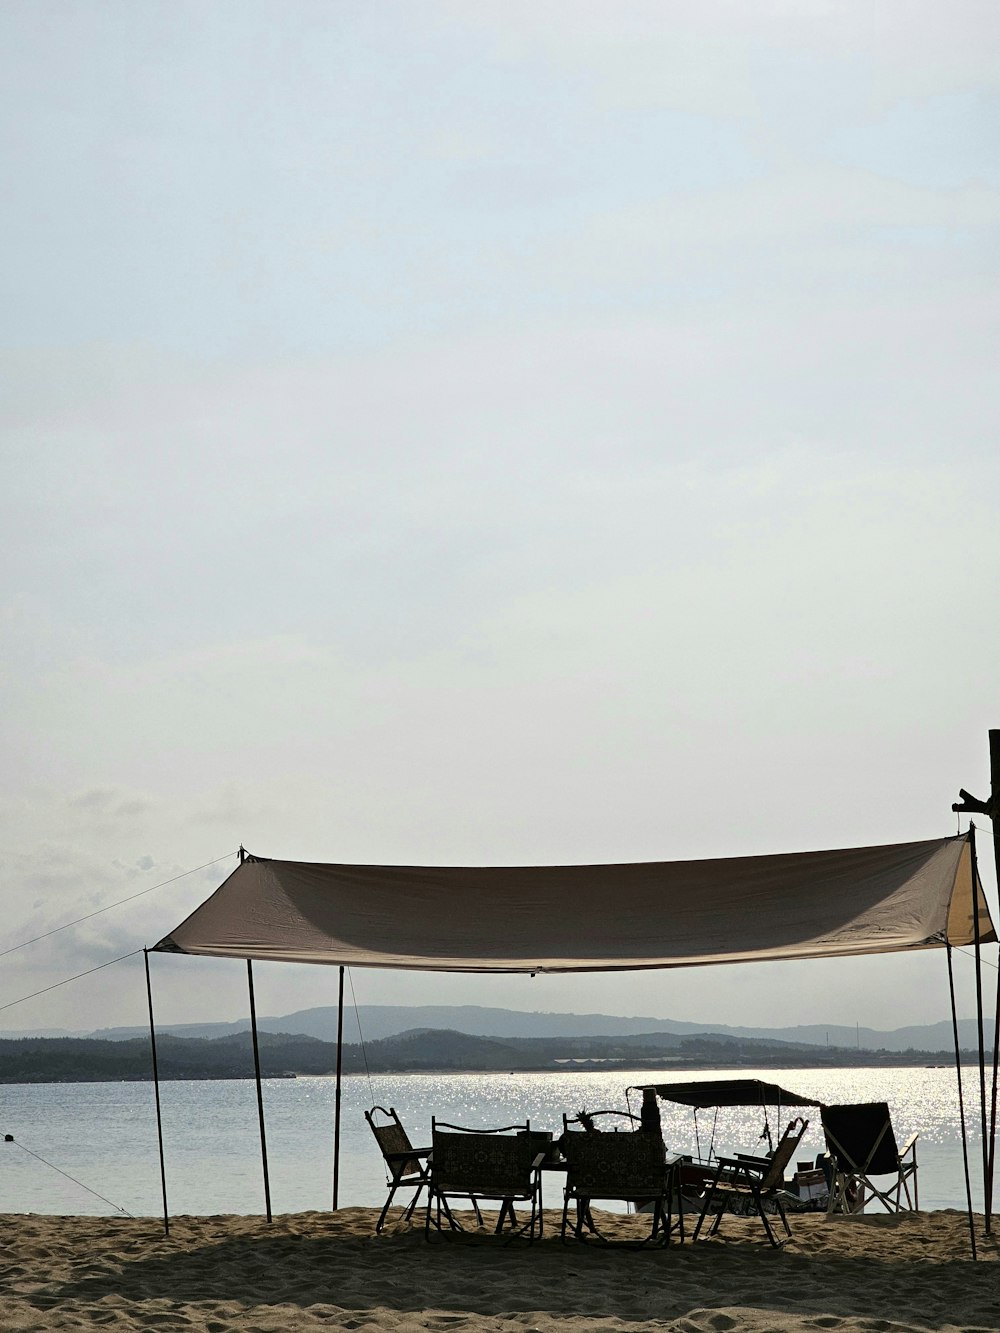 a tent set up on a beach next to a body of water